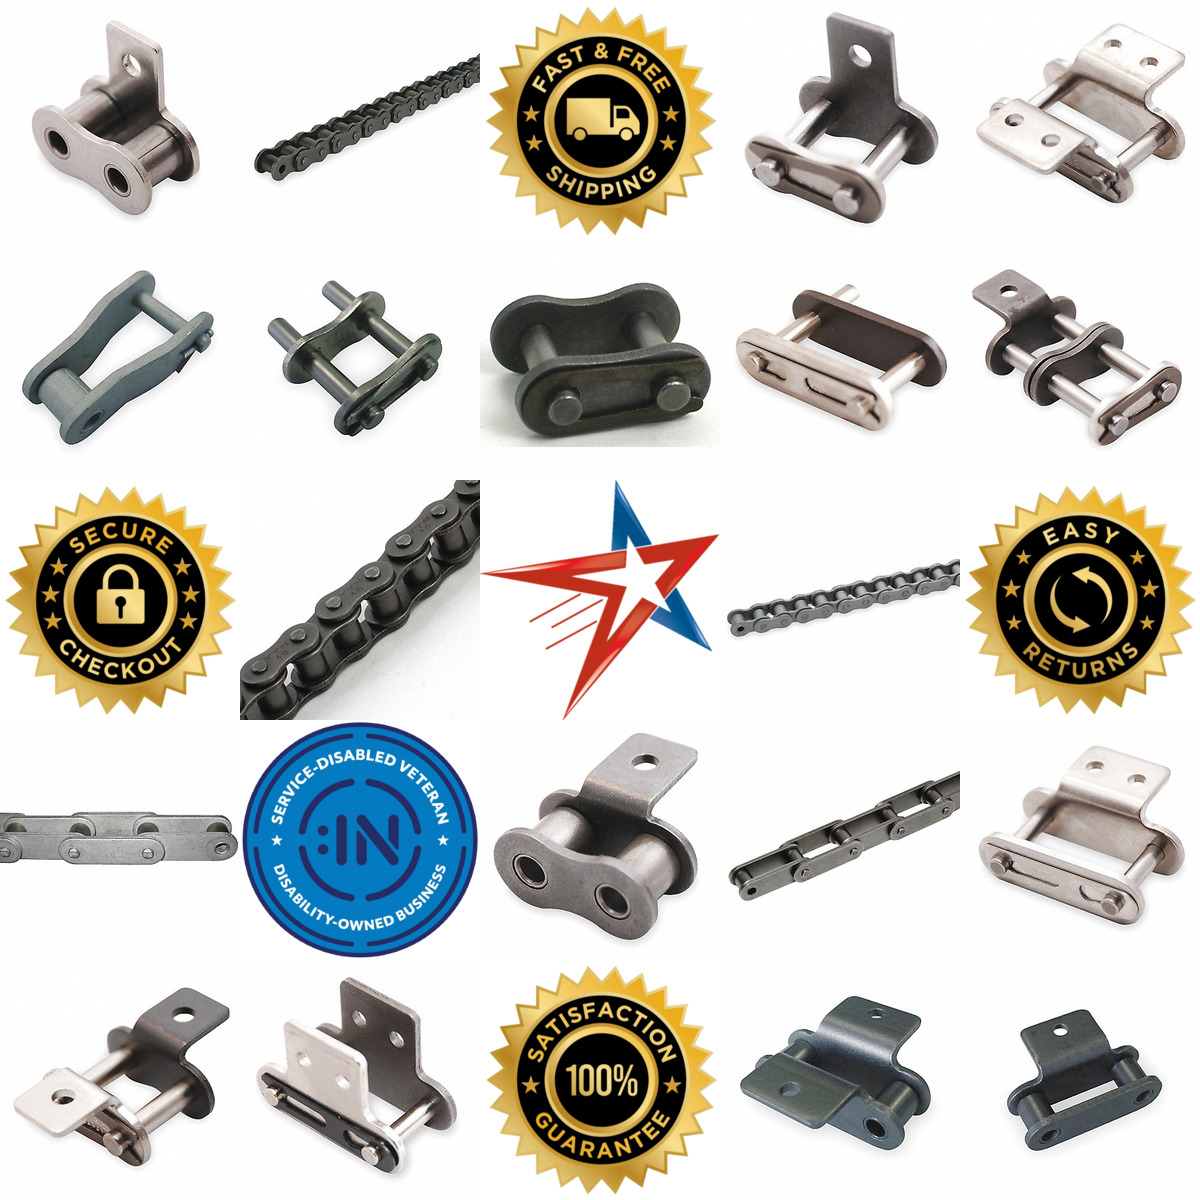 A selection of Chain and Tools products on GoVets